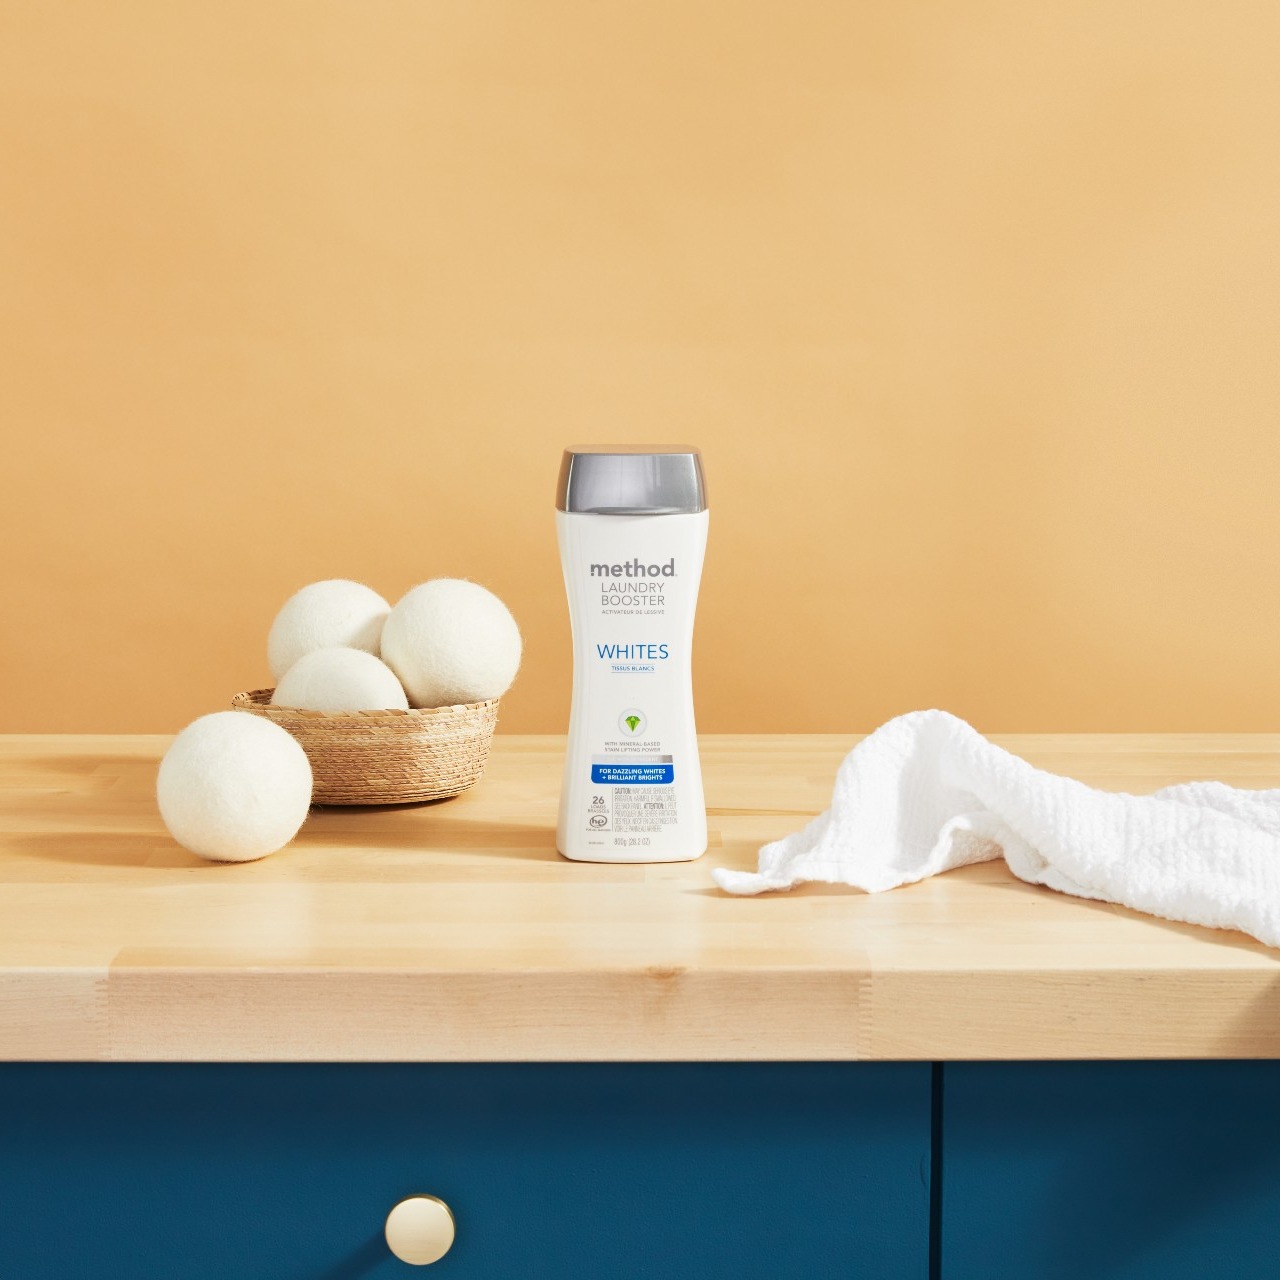 A bottle of method Laundry Booster on a table with wool dryer balls.